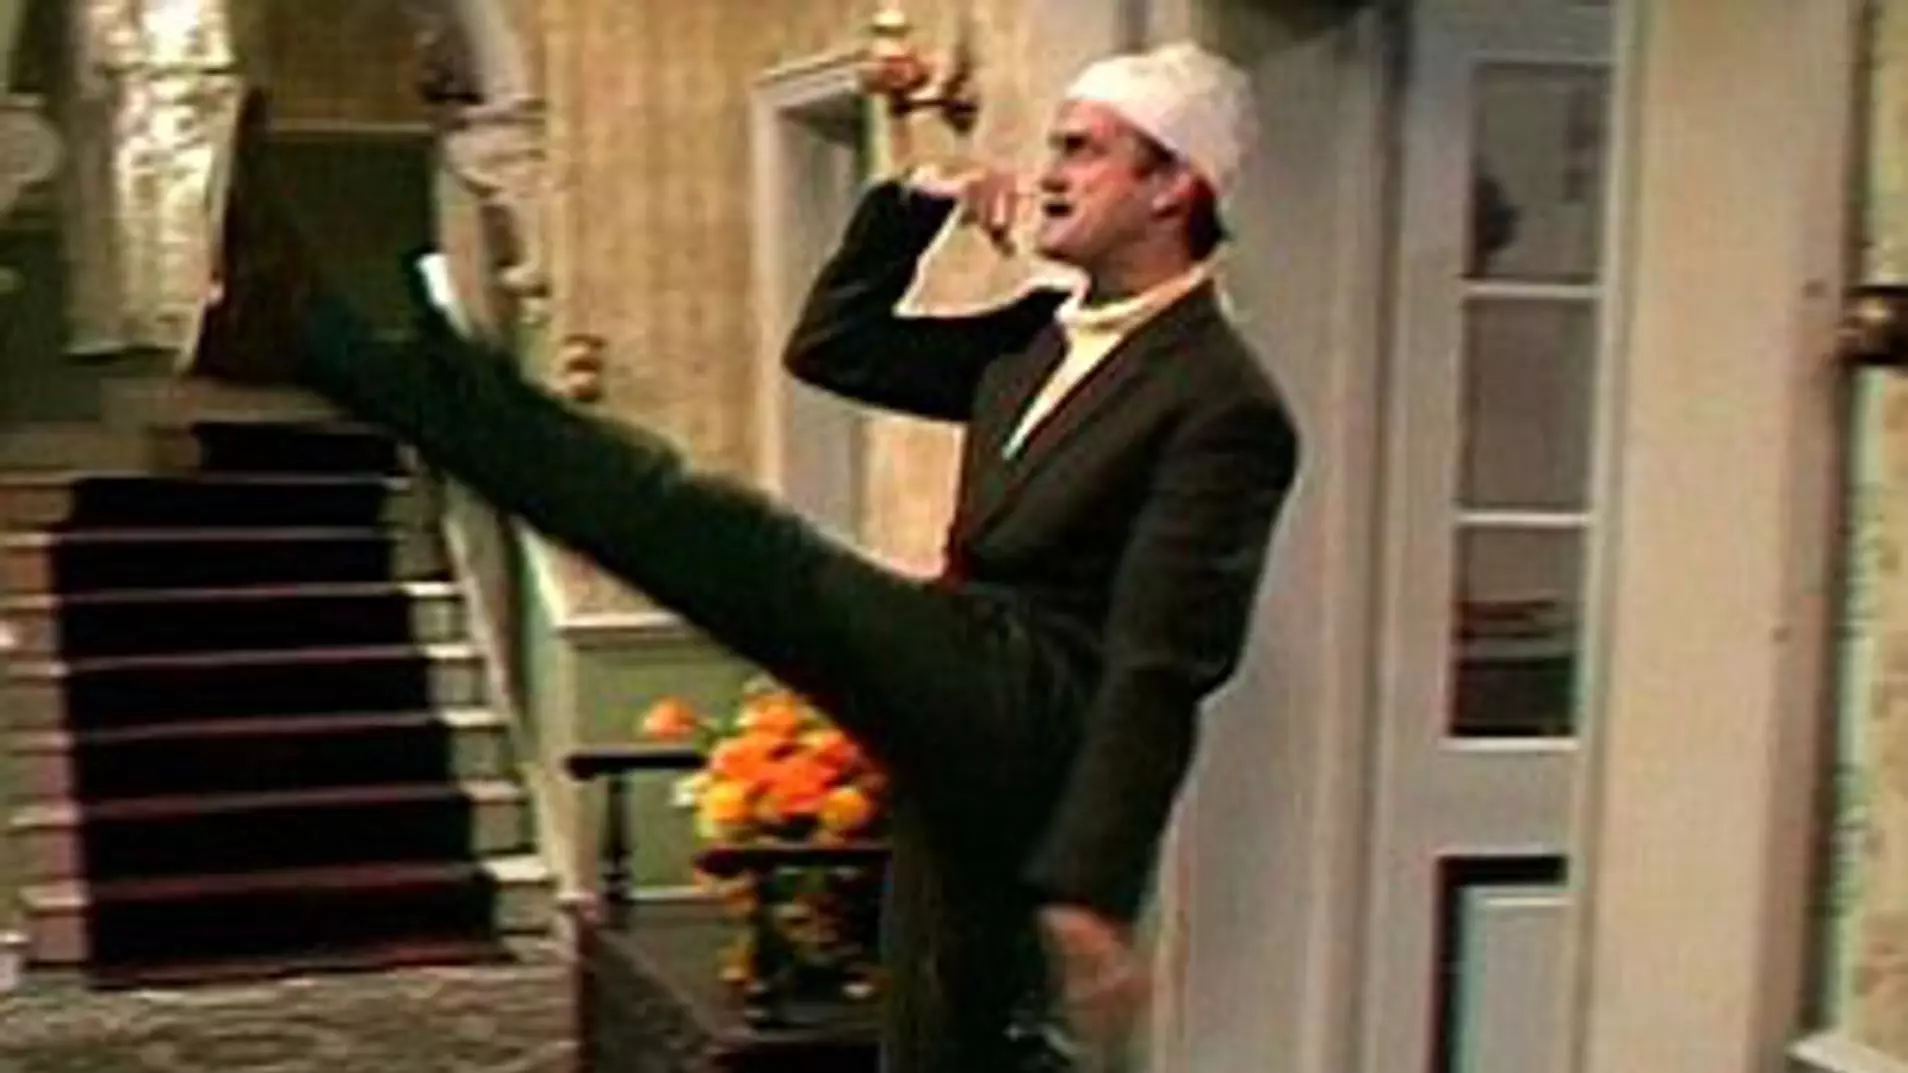 Fawlty Towers 'Don't Mention The War' Episode Has Been Removed From UKTV